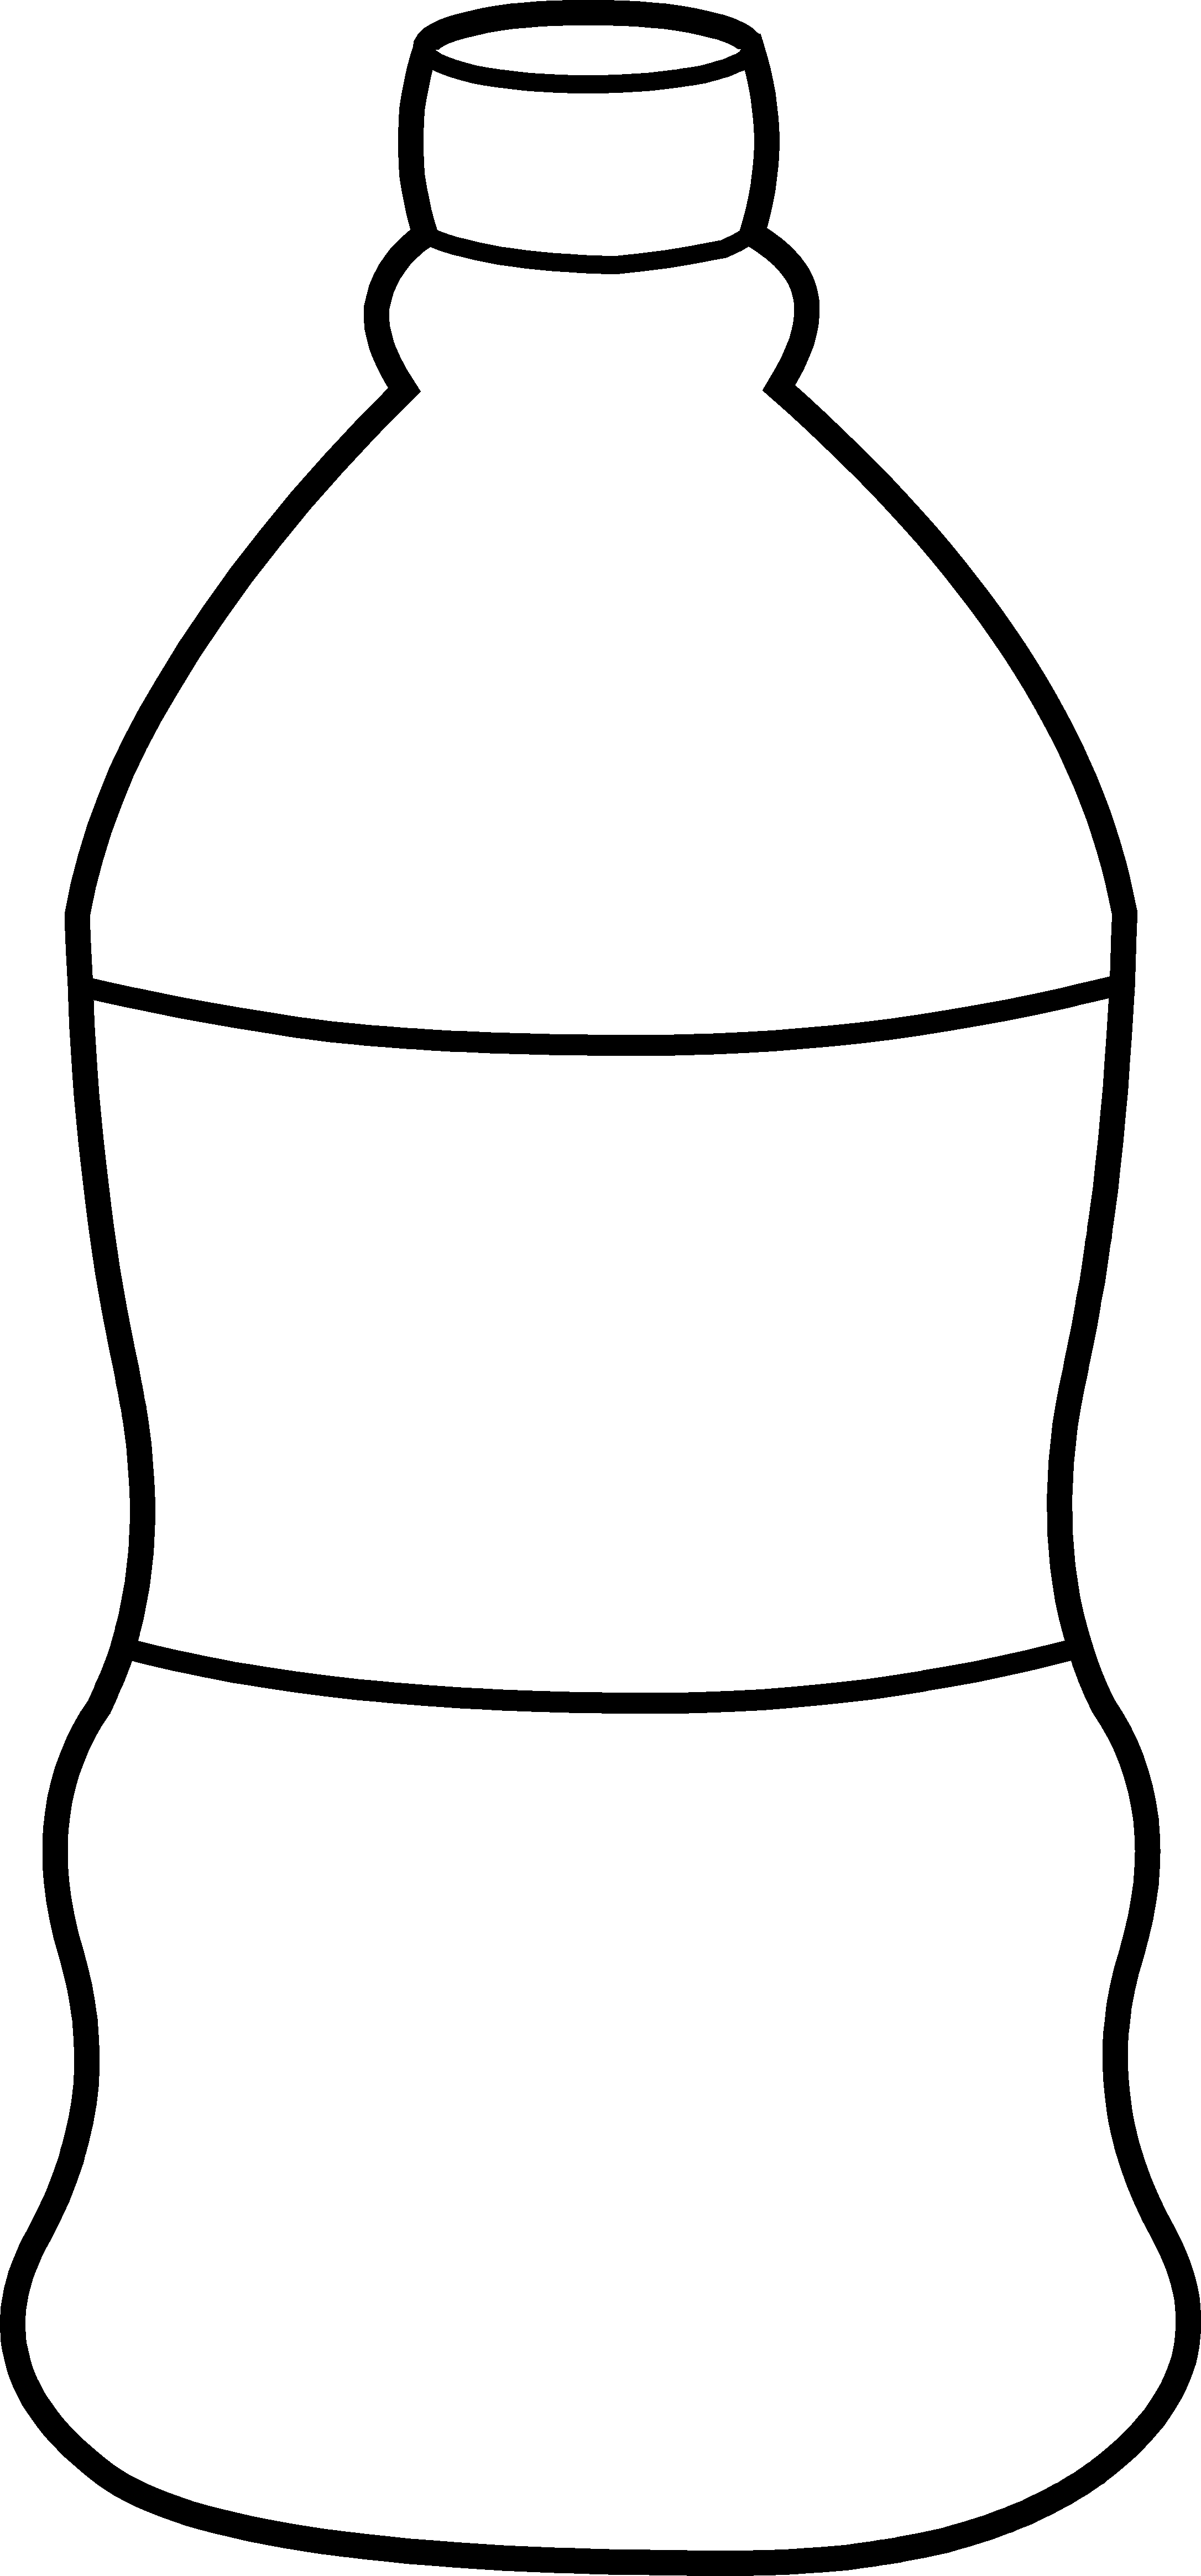 Water Bottle Clipart Black And White   Clipart Panda   Free